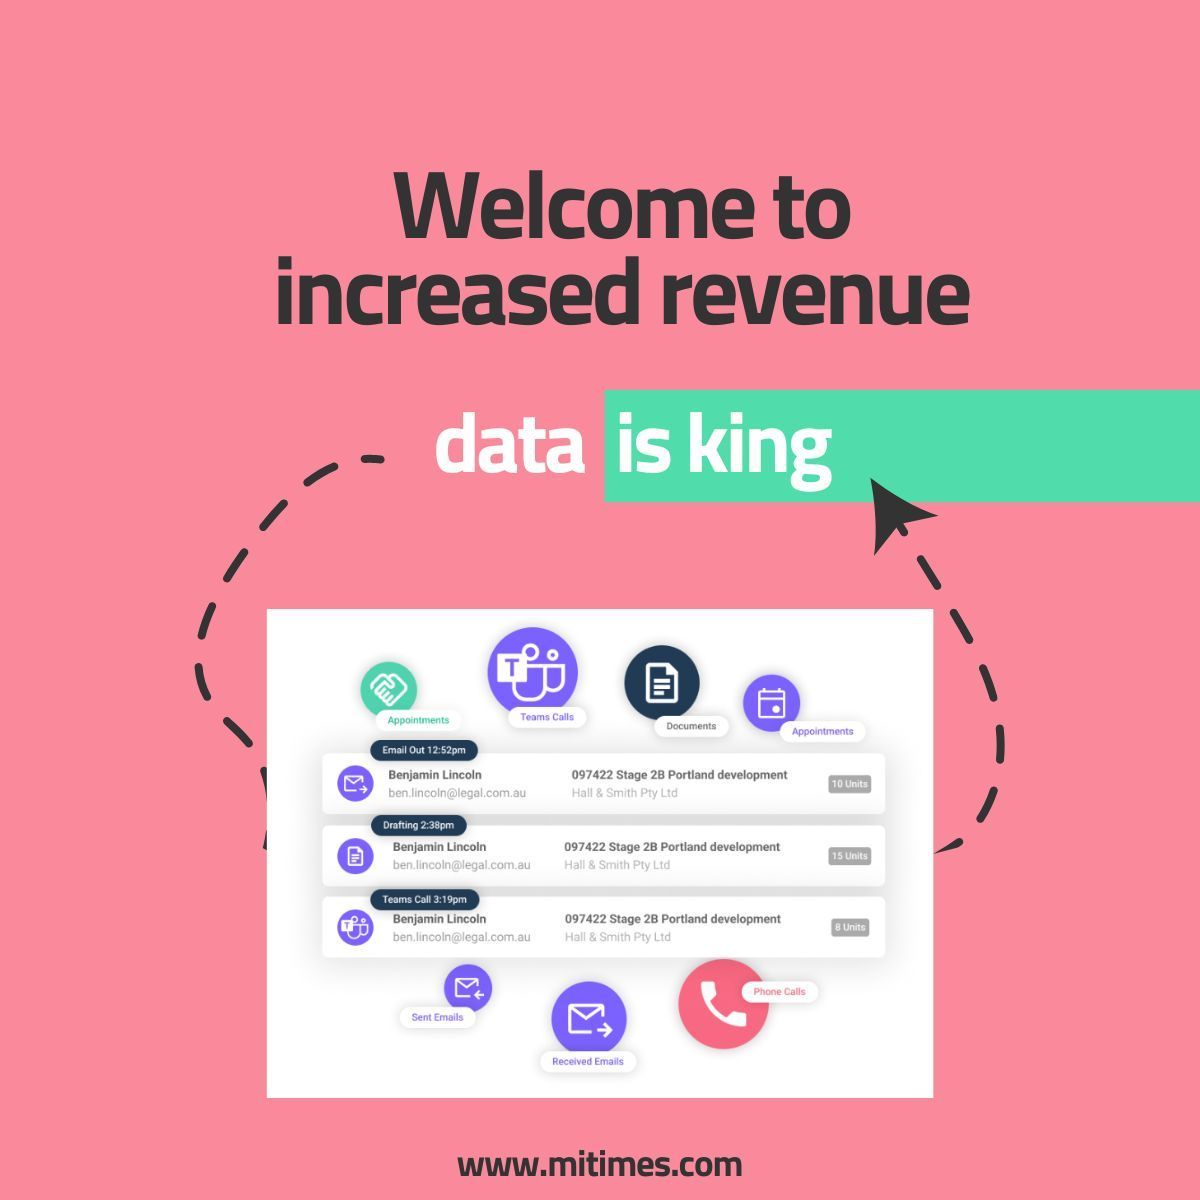 Your firms human knowledge is it’s biggest asset. To accurately capture the true effort and the data associated with that is important for a law firm to create true value to their clients exists in keeping your time efficiently and accurately #mitimes #legaltech #australianmade